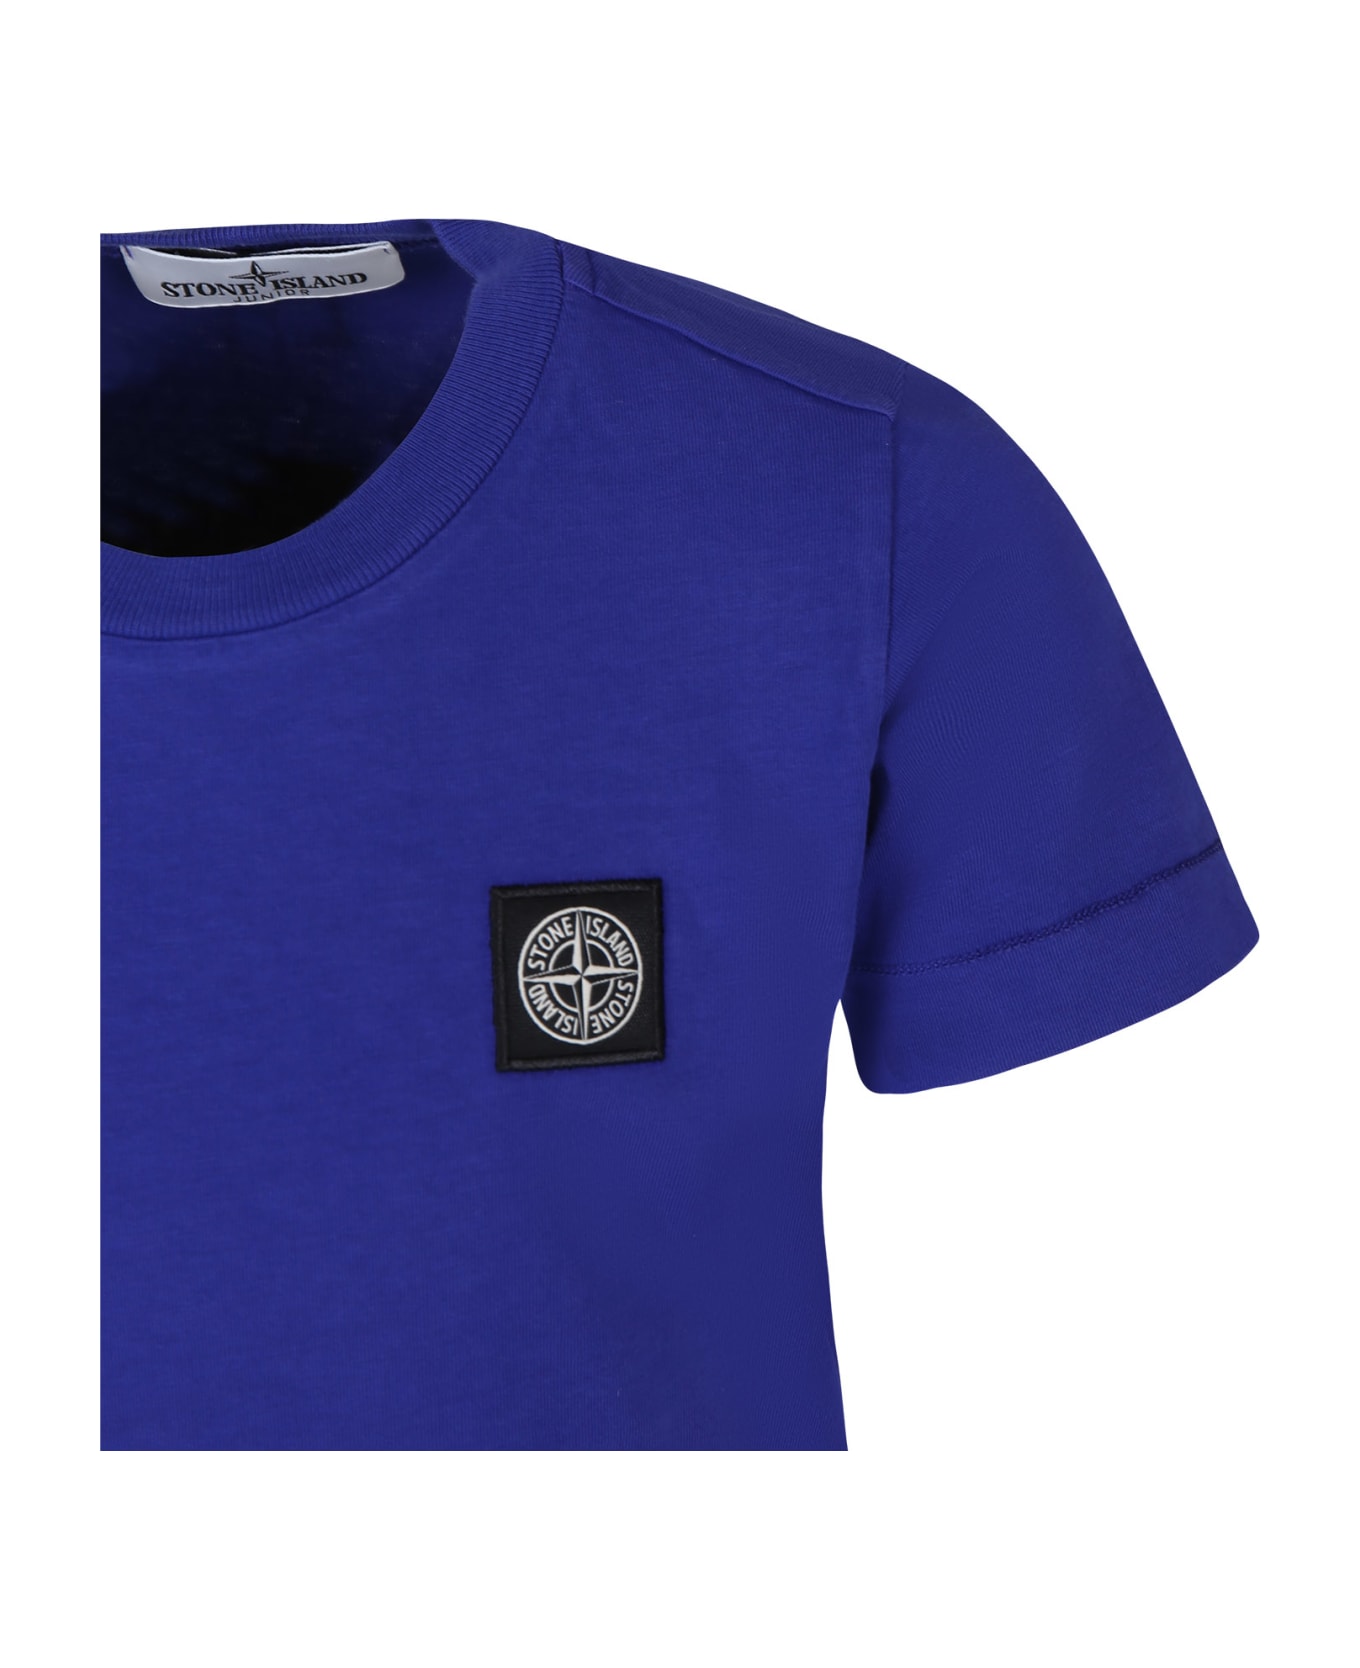 Stone Island Junior Light Blue T-shirt For Boy With Logo - Light Blue Tシャツ＆ポロシャツ